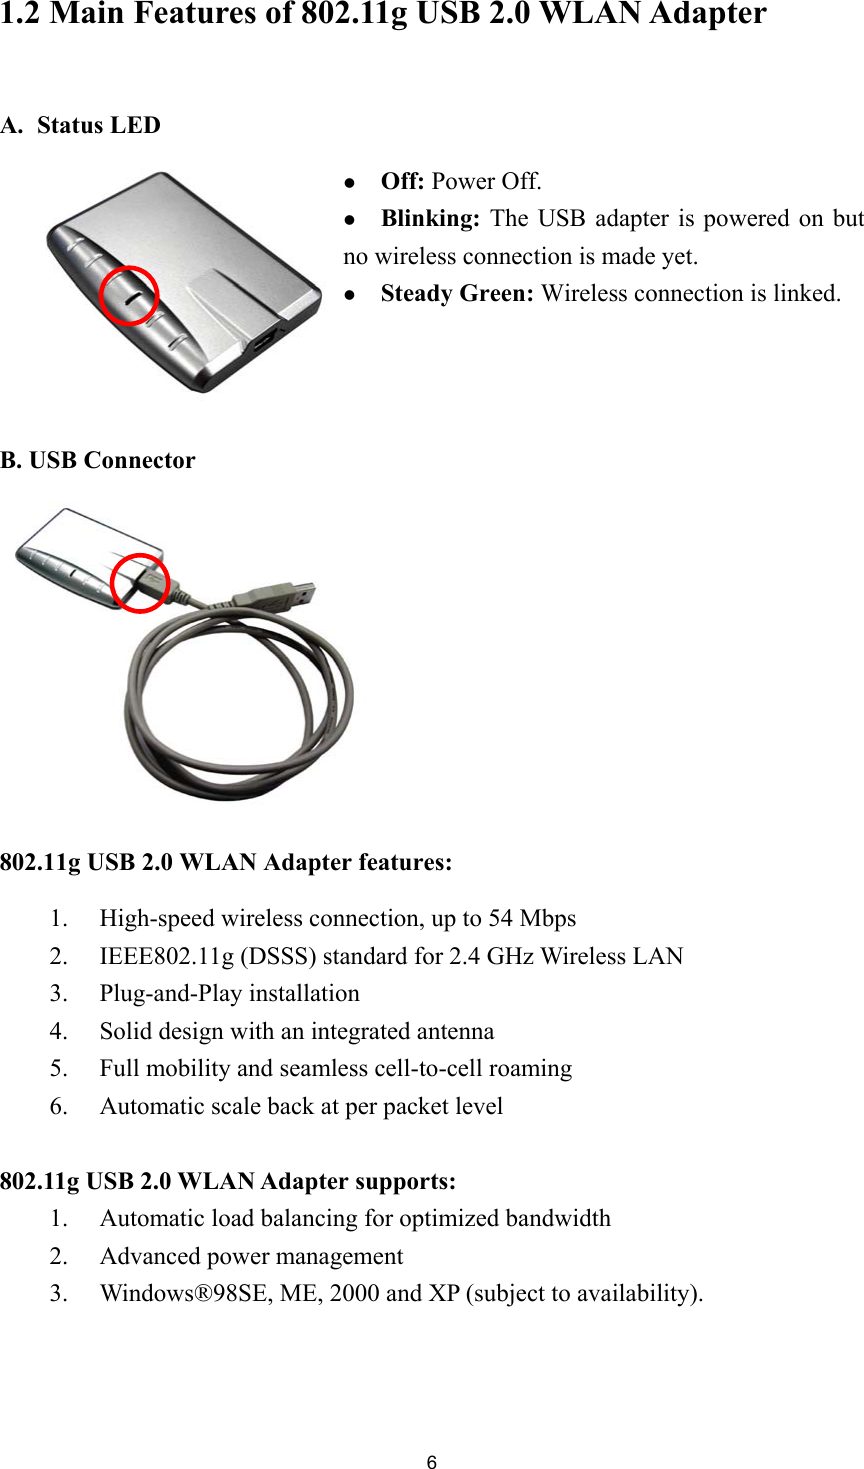 61.2 Main Features of 802.11g USB 2.0 WLAN AdapterA. Status LEDz Off: Power Off.z Blinking: The USB adapter is powered on butno wireless connection is made yet.z Steady Green: Wireless connection is linked.B. USB Connector802.11g USB 2.0 WLAN Adapter features:1. High-speed wireless connection, up to 54 Mbps2. IEEE802.11g (DSSS) standard for 2.4 GHz Wireless LAN3. Plug-and-Play installation4. Solid design with an integrated antenna5. Full mobility and seamless cell-to-cell roaming6. Automatic scale back at per packet level802.11g USB 2.0 WLAN Adapter supports:1. Automatic load balancing for optimized bandwidth2. Advanced power management3. Windows®98SE, ME, 2000 and XP (subject to availability).